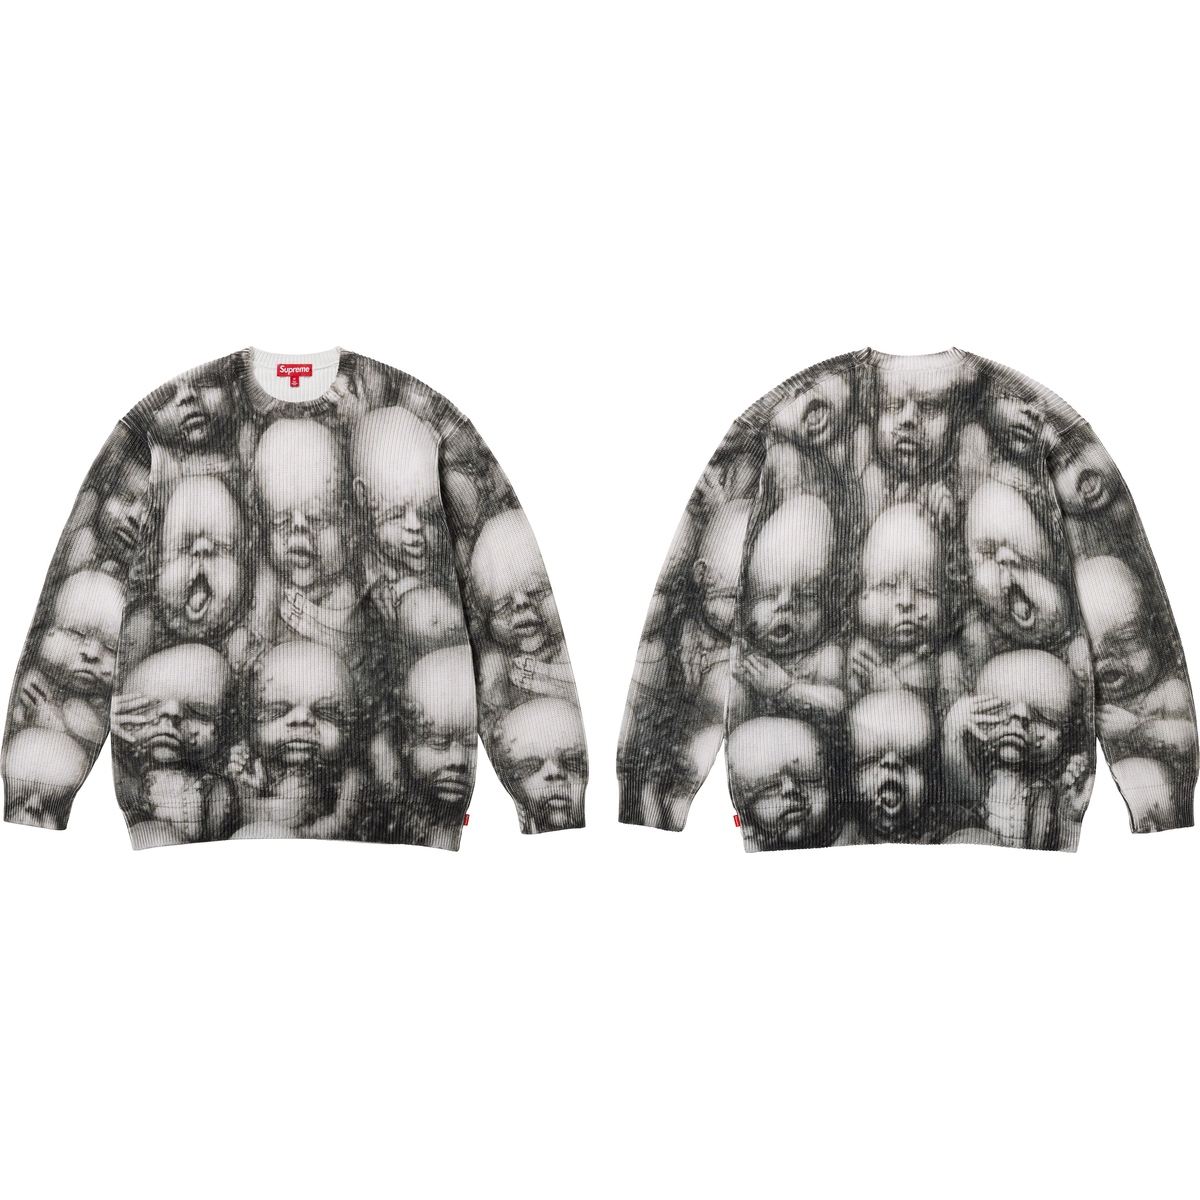 Supreme H.R. Giger Sweater released during fall winter 23 season